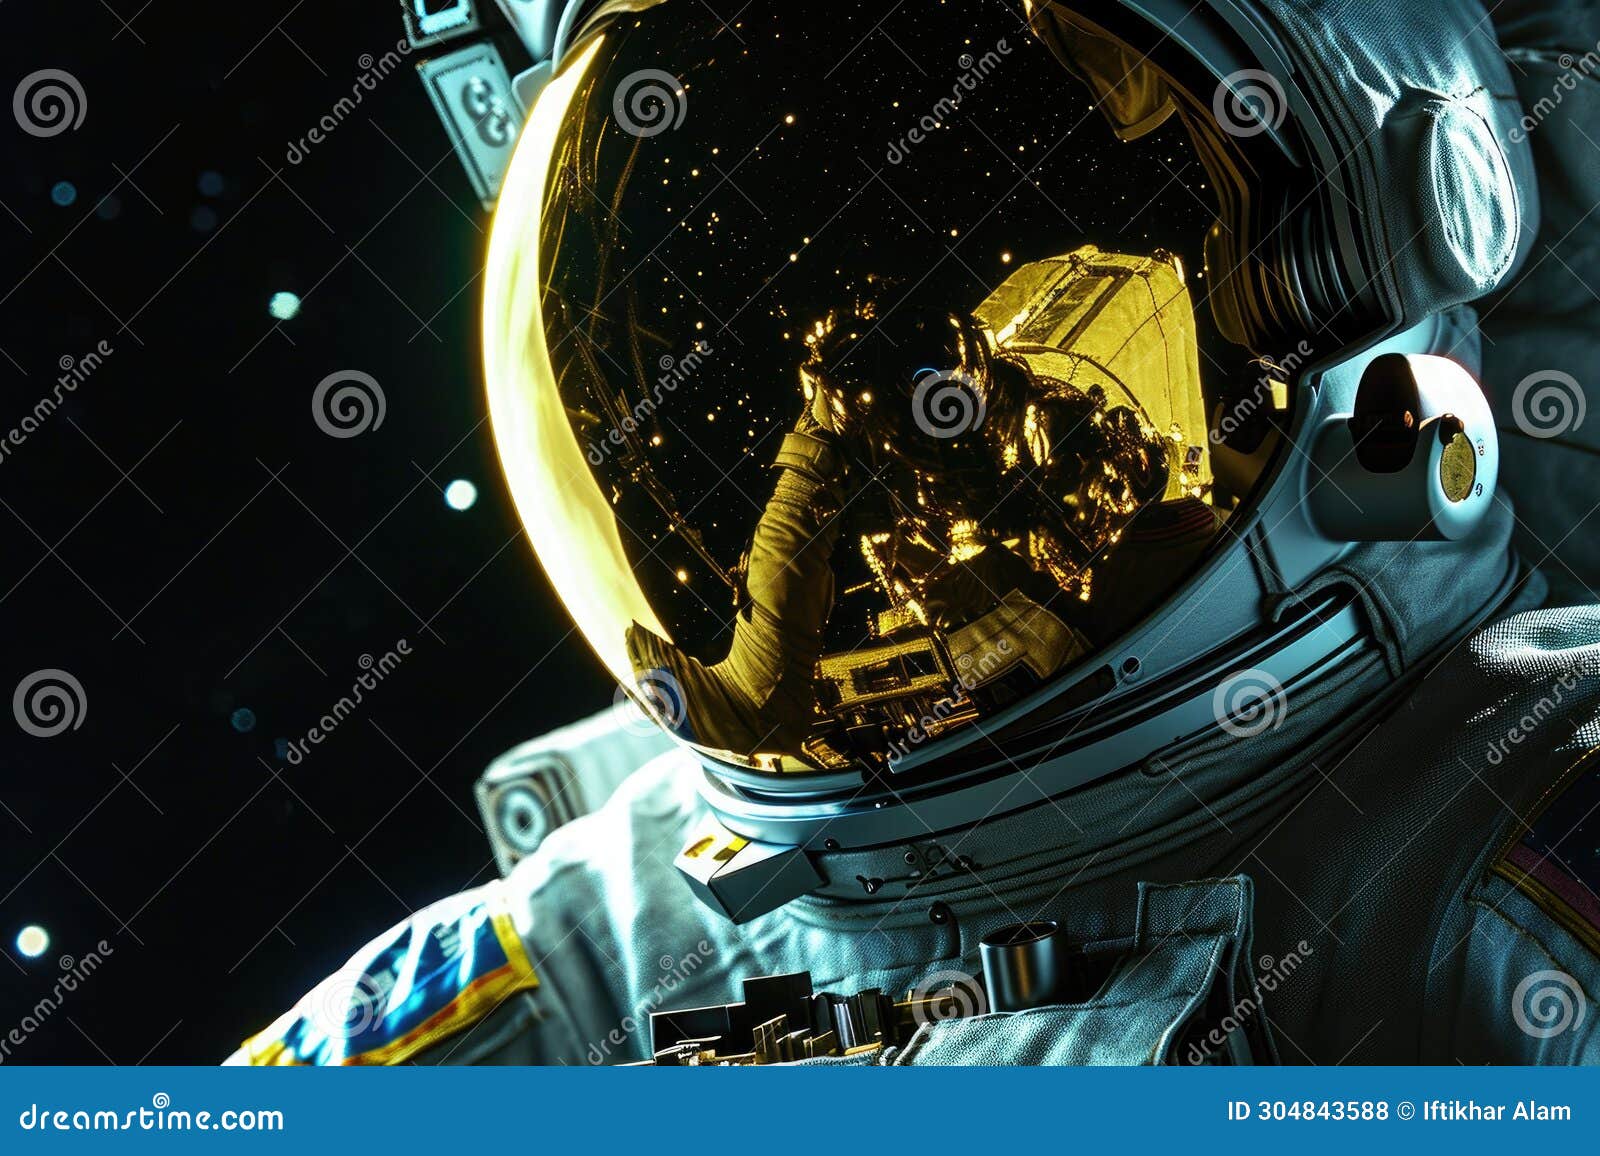 a man wearing a space suit stands proudly in front of a massive space station, a detailed image of a gold-plated visor on an